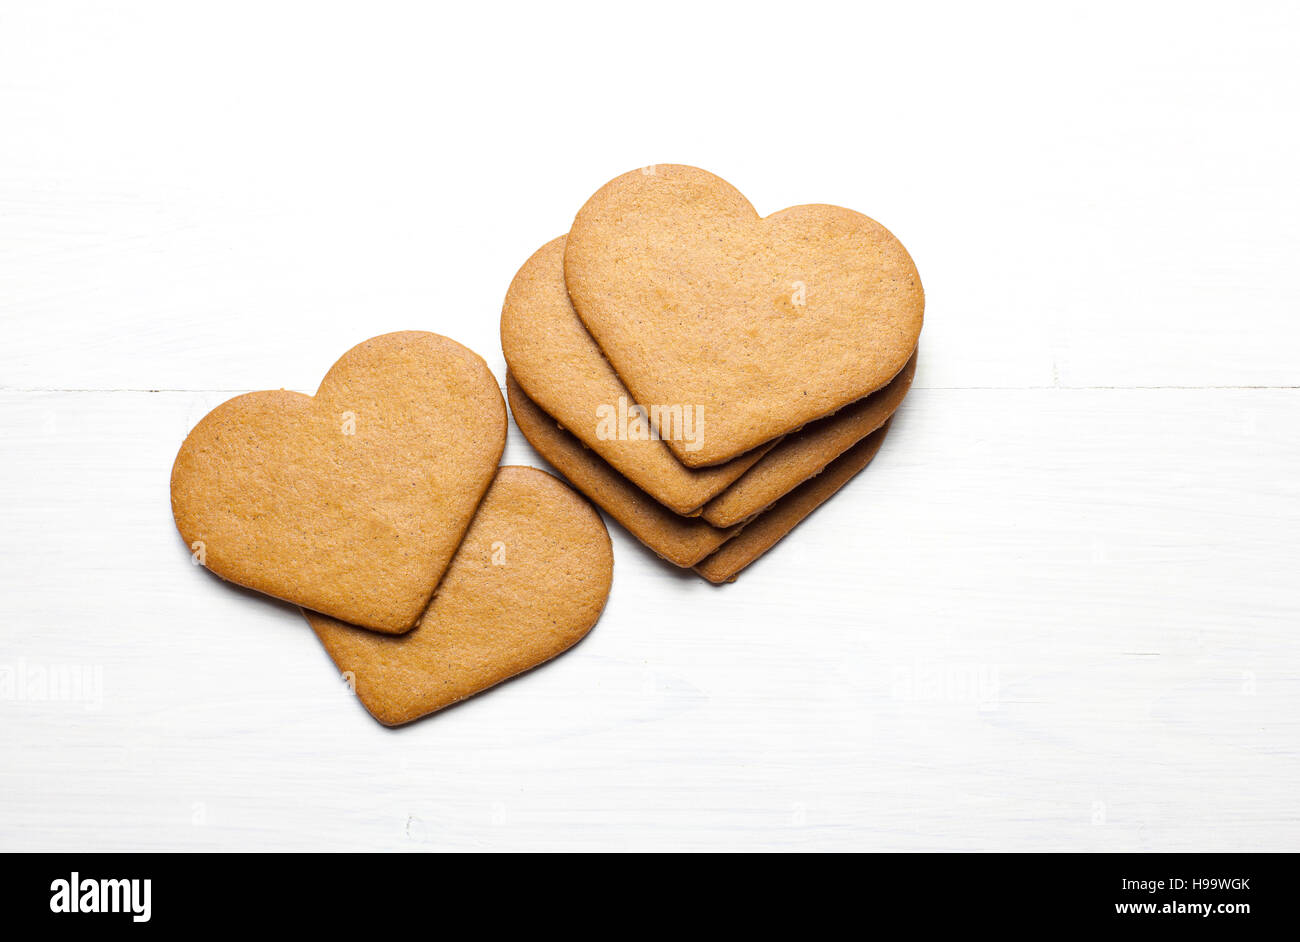 Heart shaped Gingerbread cookie (stacked group). Stock Photo